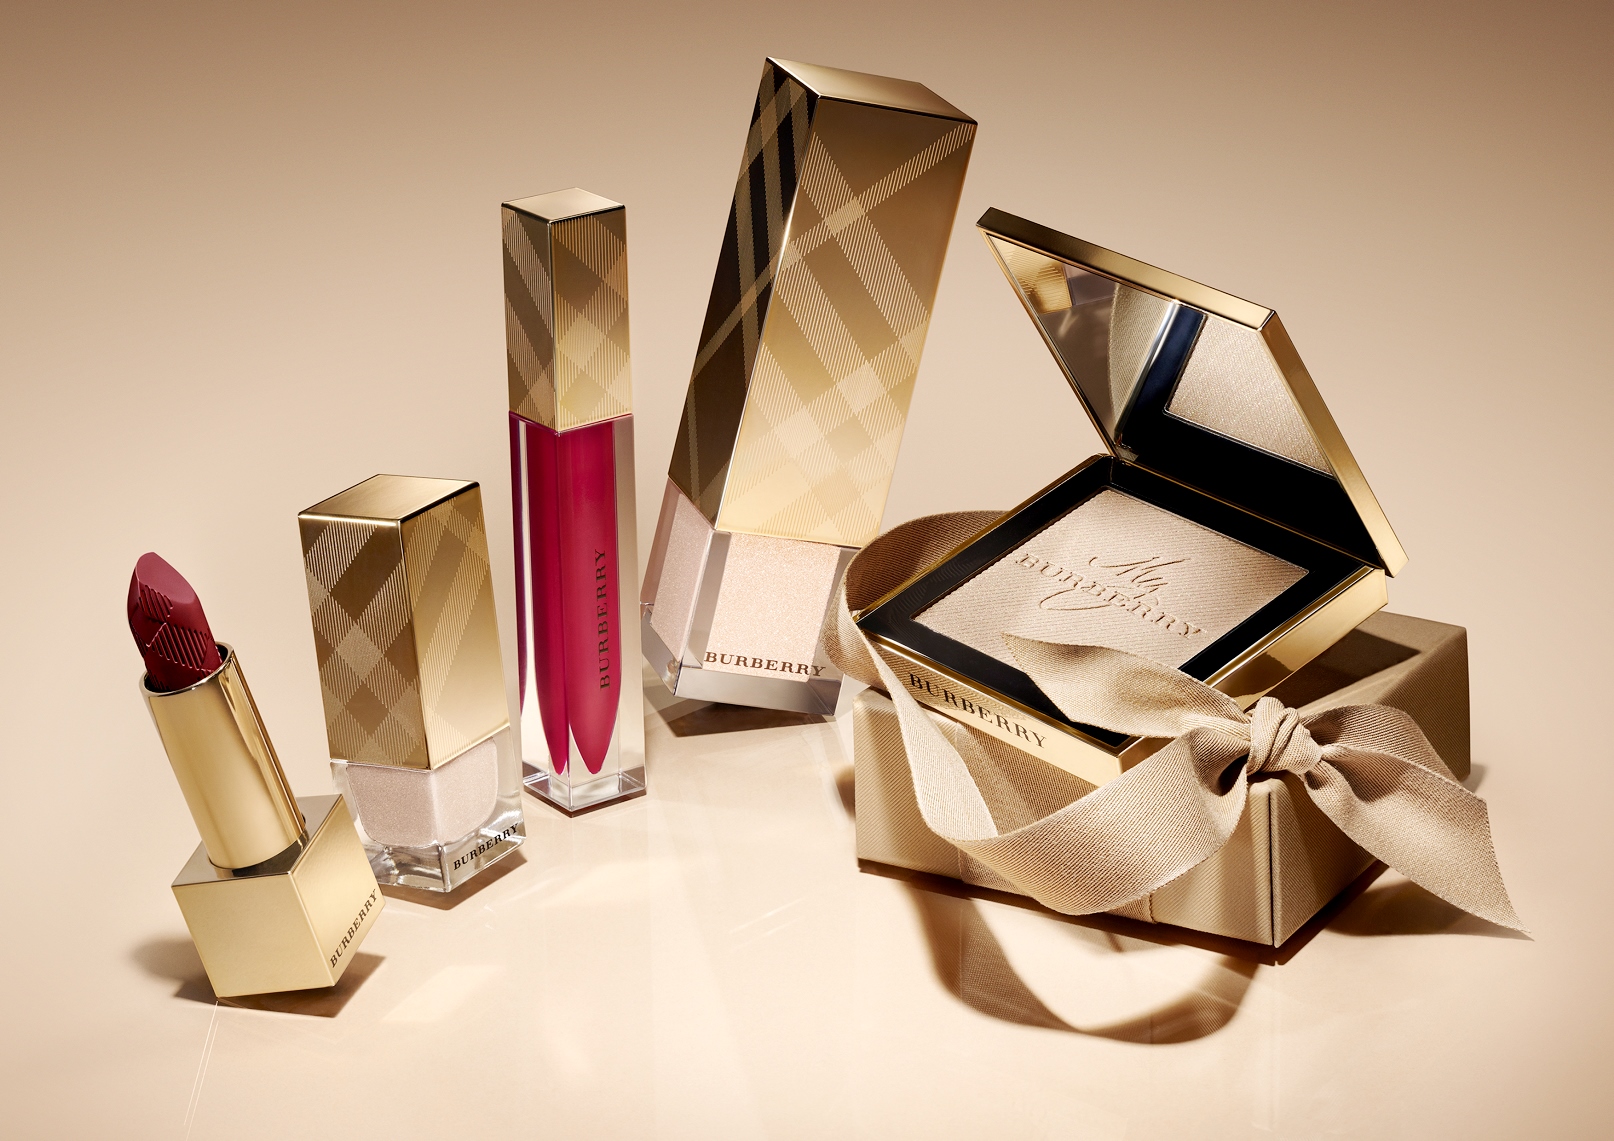 Burberry Winter Glow Holiday Collection 2014